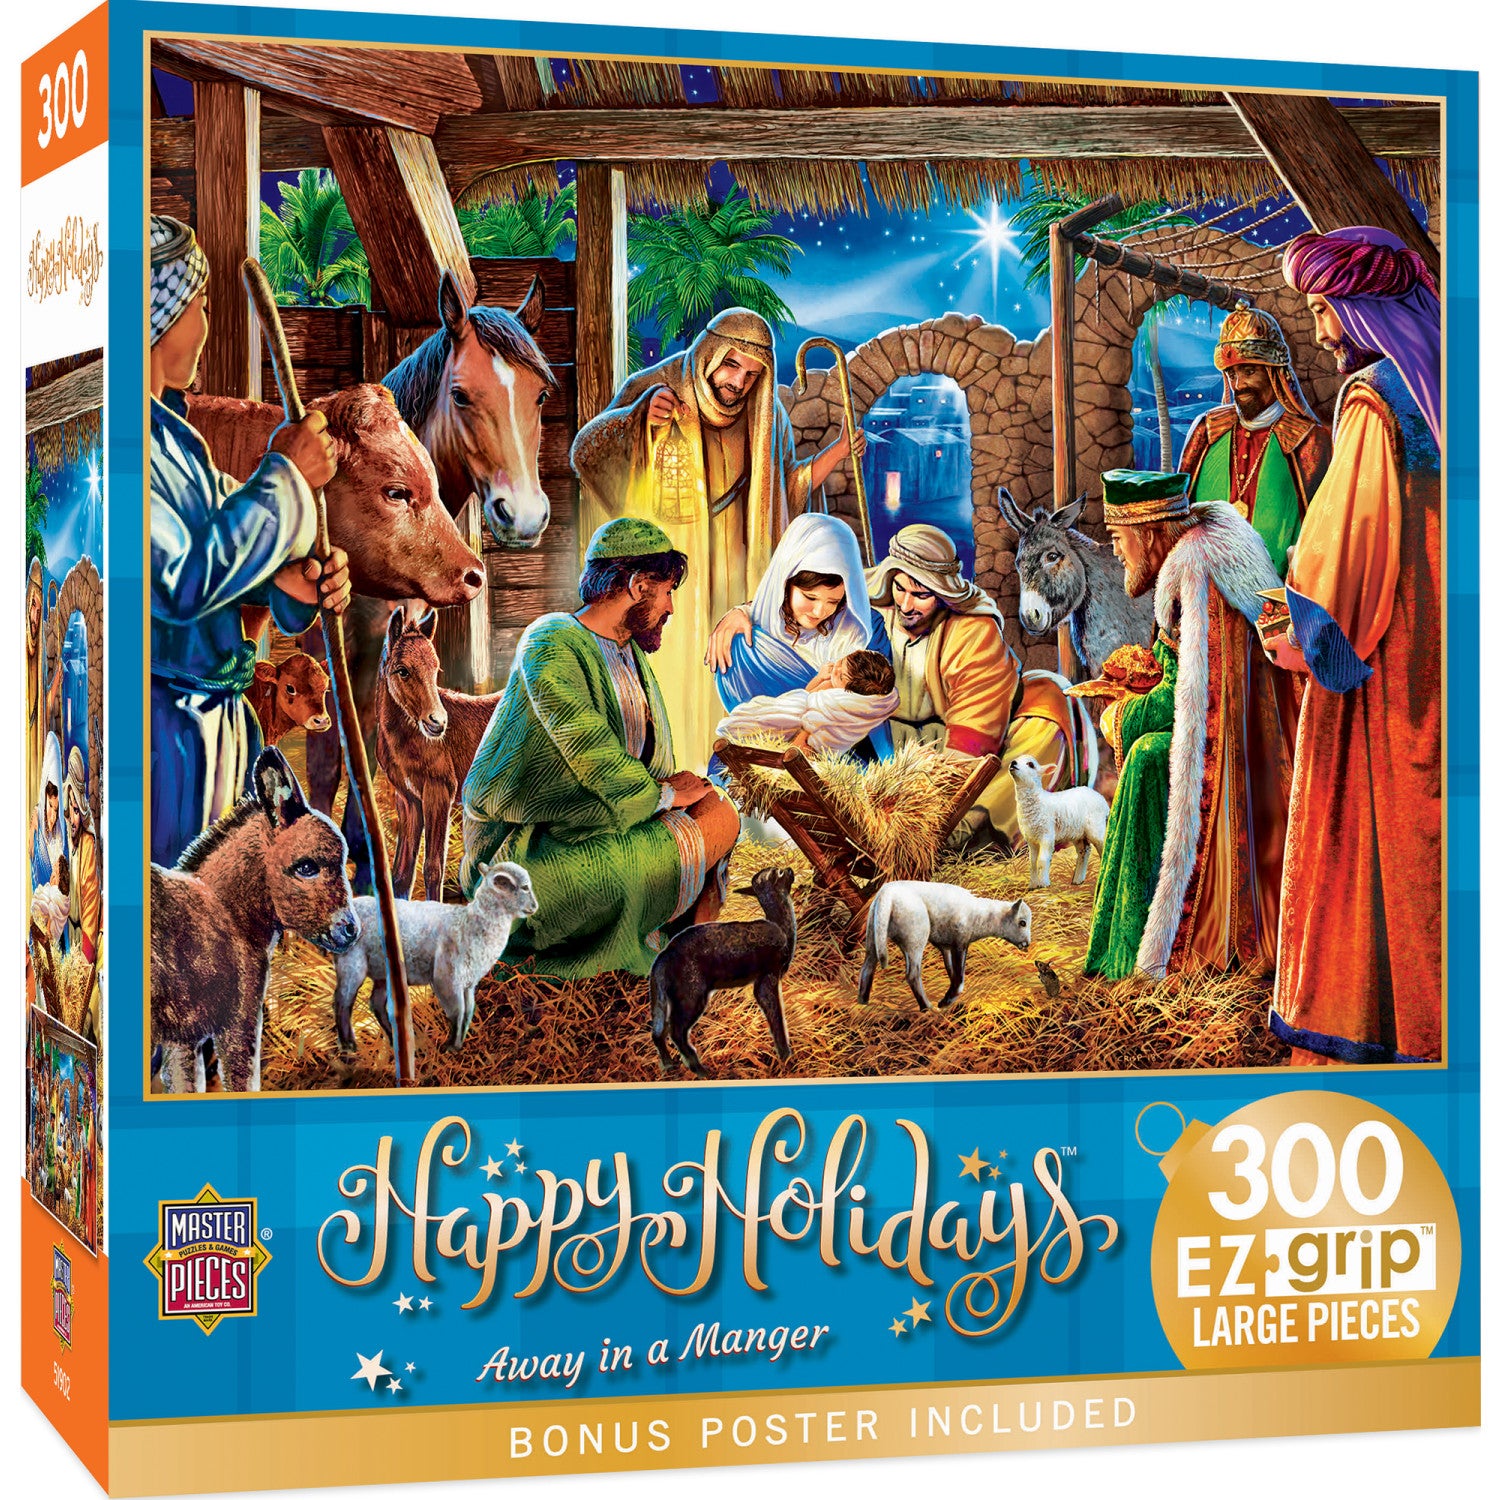 Happy Holidays - Away in a Manger 300 Piece EZ Grip Jigsaw Puzzle